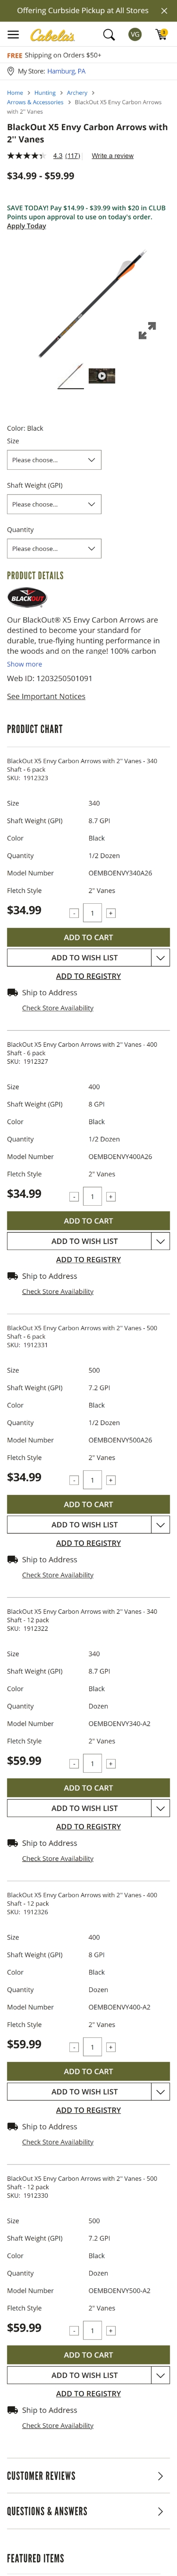 cabelas product page mobile